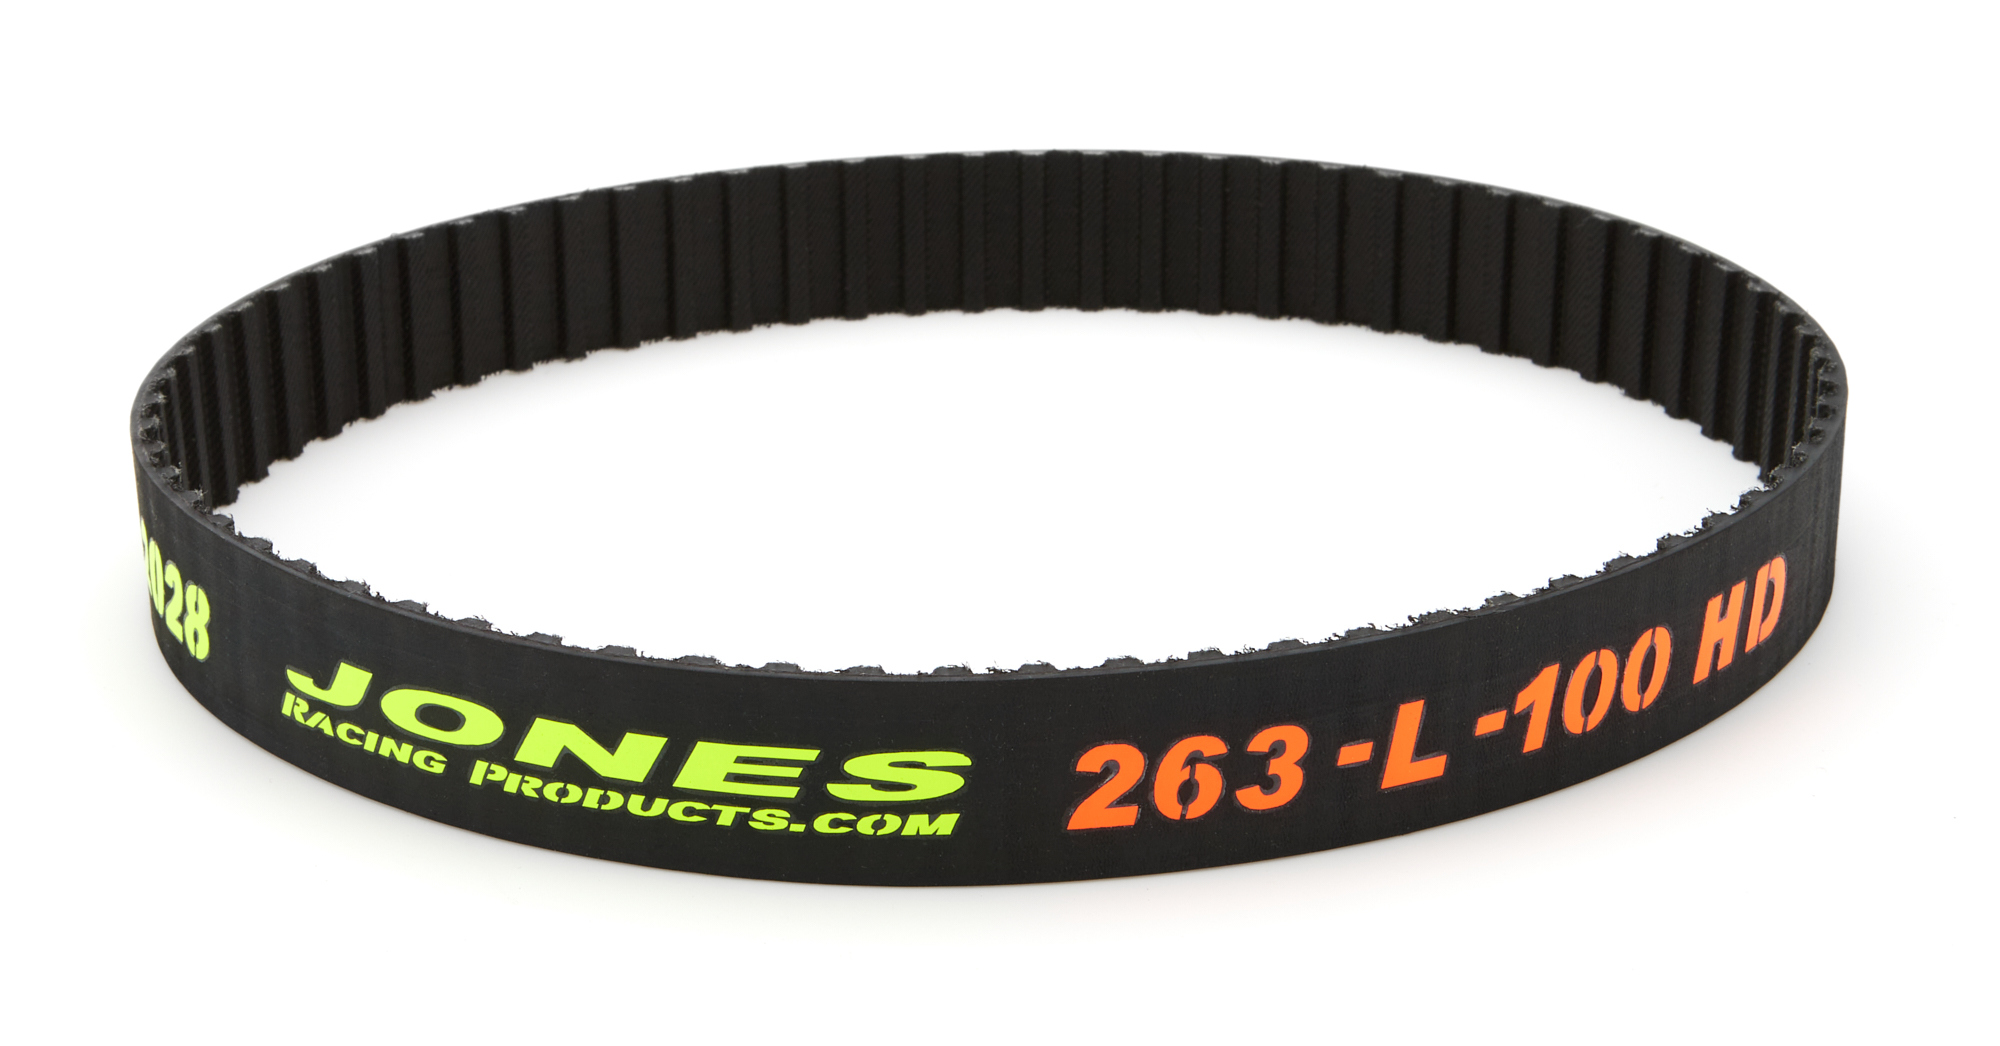 Jones Racing Products 263-L-100 Gilmer Drive Belt, 26.250 in Long, 1 in Wide, 3/8 in Pitch, Each